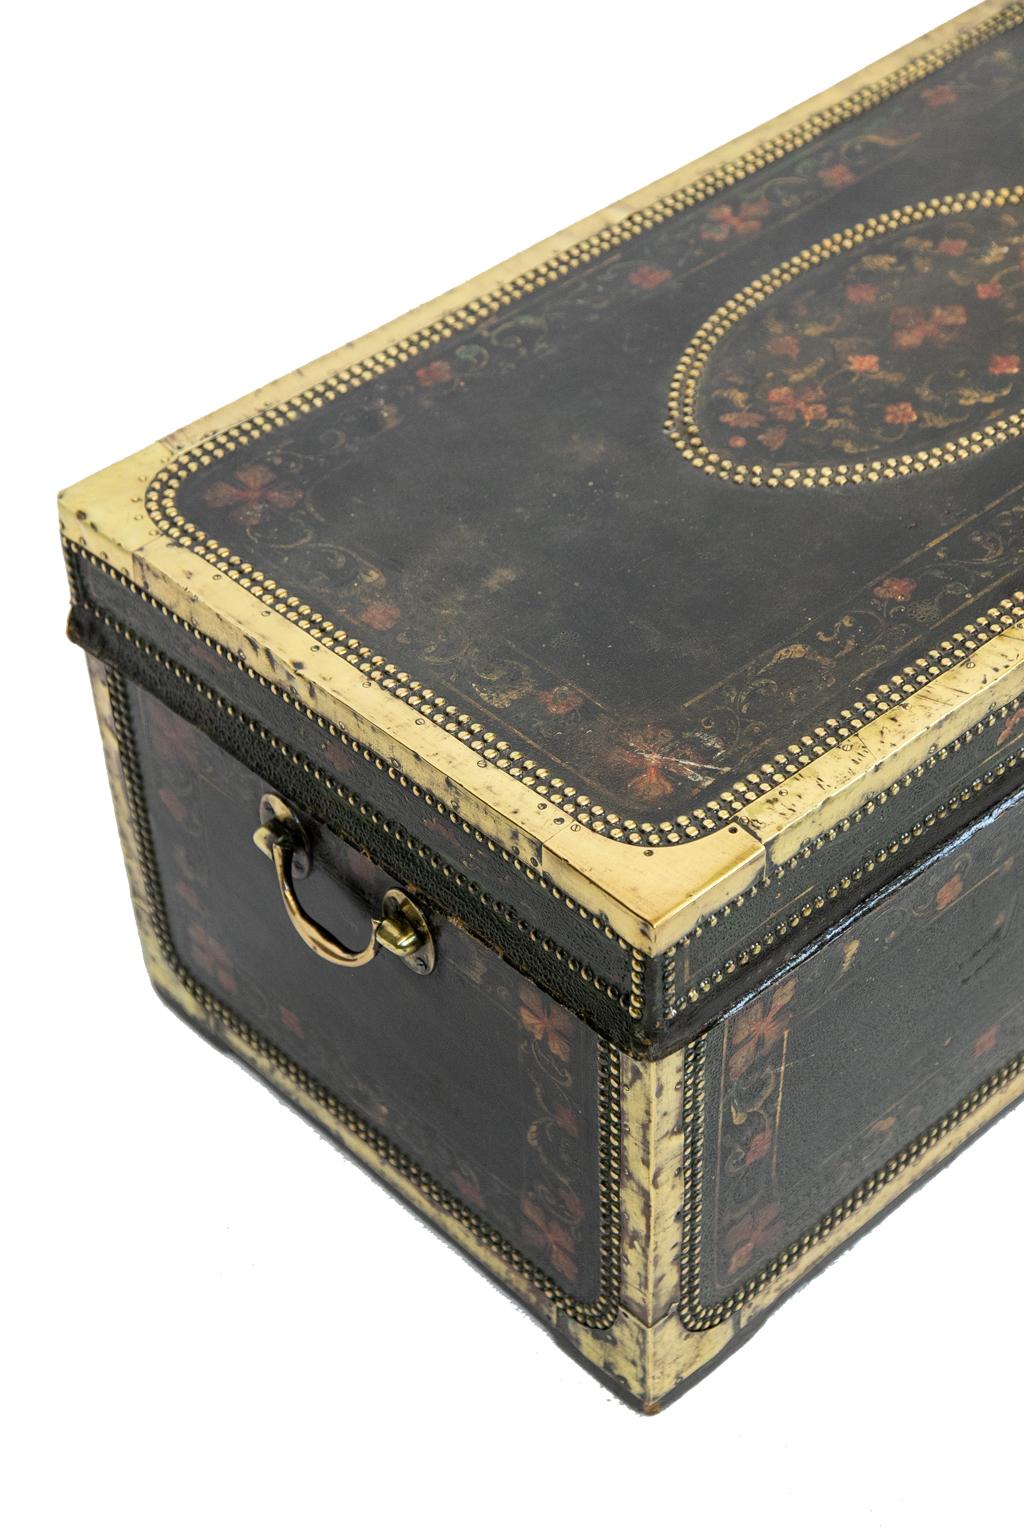 Painted leather camphor wood trunk, the top is double brass studded with brass framing. It is painted with a floral center cartouche and borders and has the original brass carrying handles.